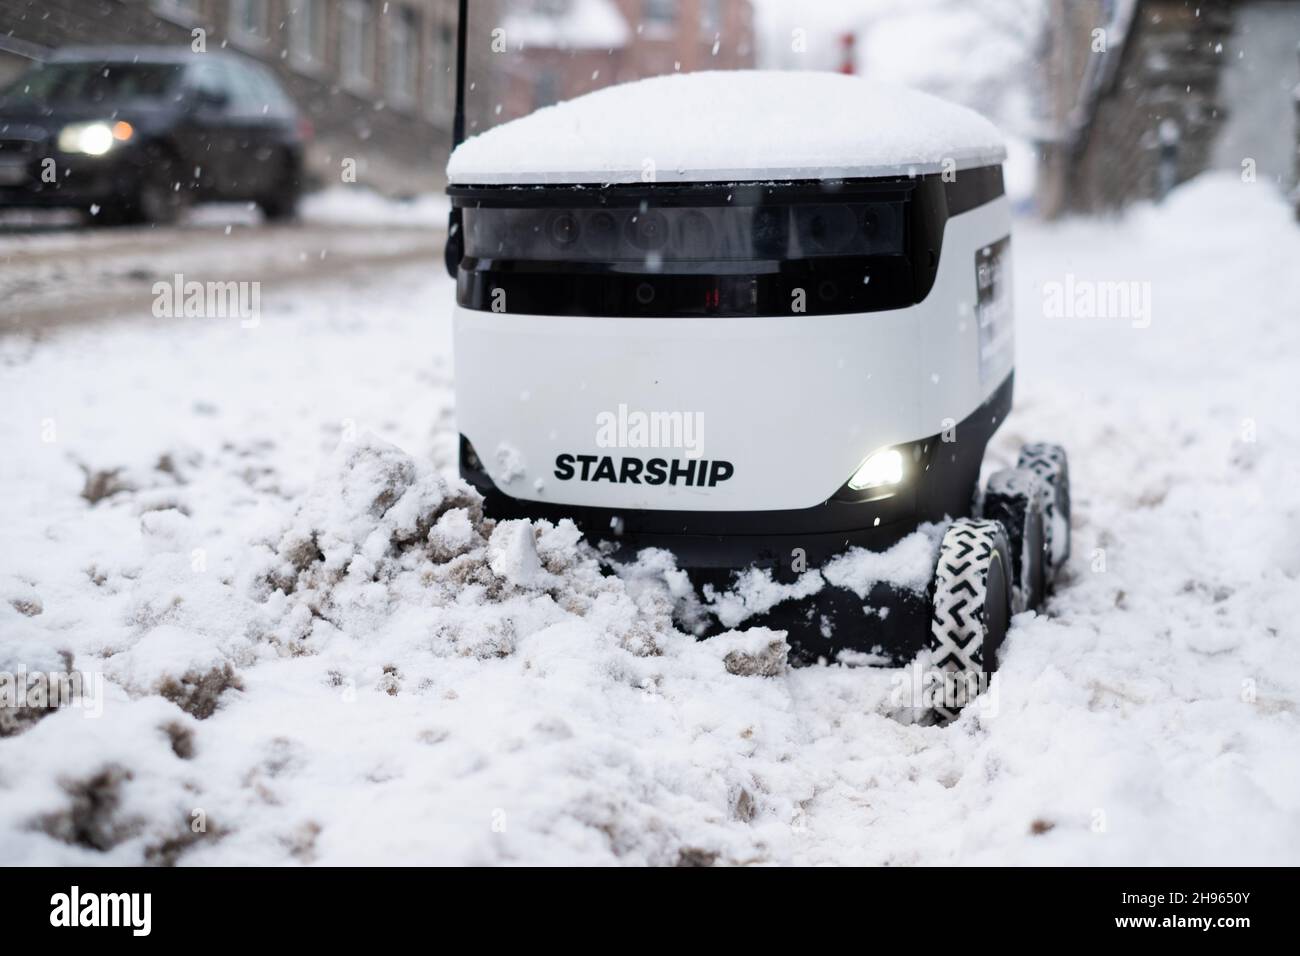 Tallinn, Estonia - December 4, 2021: Starship Technologies autonomous drone vehicle stuck in snow in winter. Self driving contactless delivery robot. Stock Photo